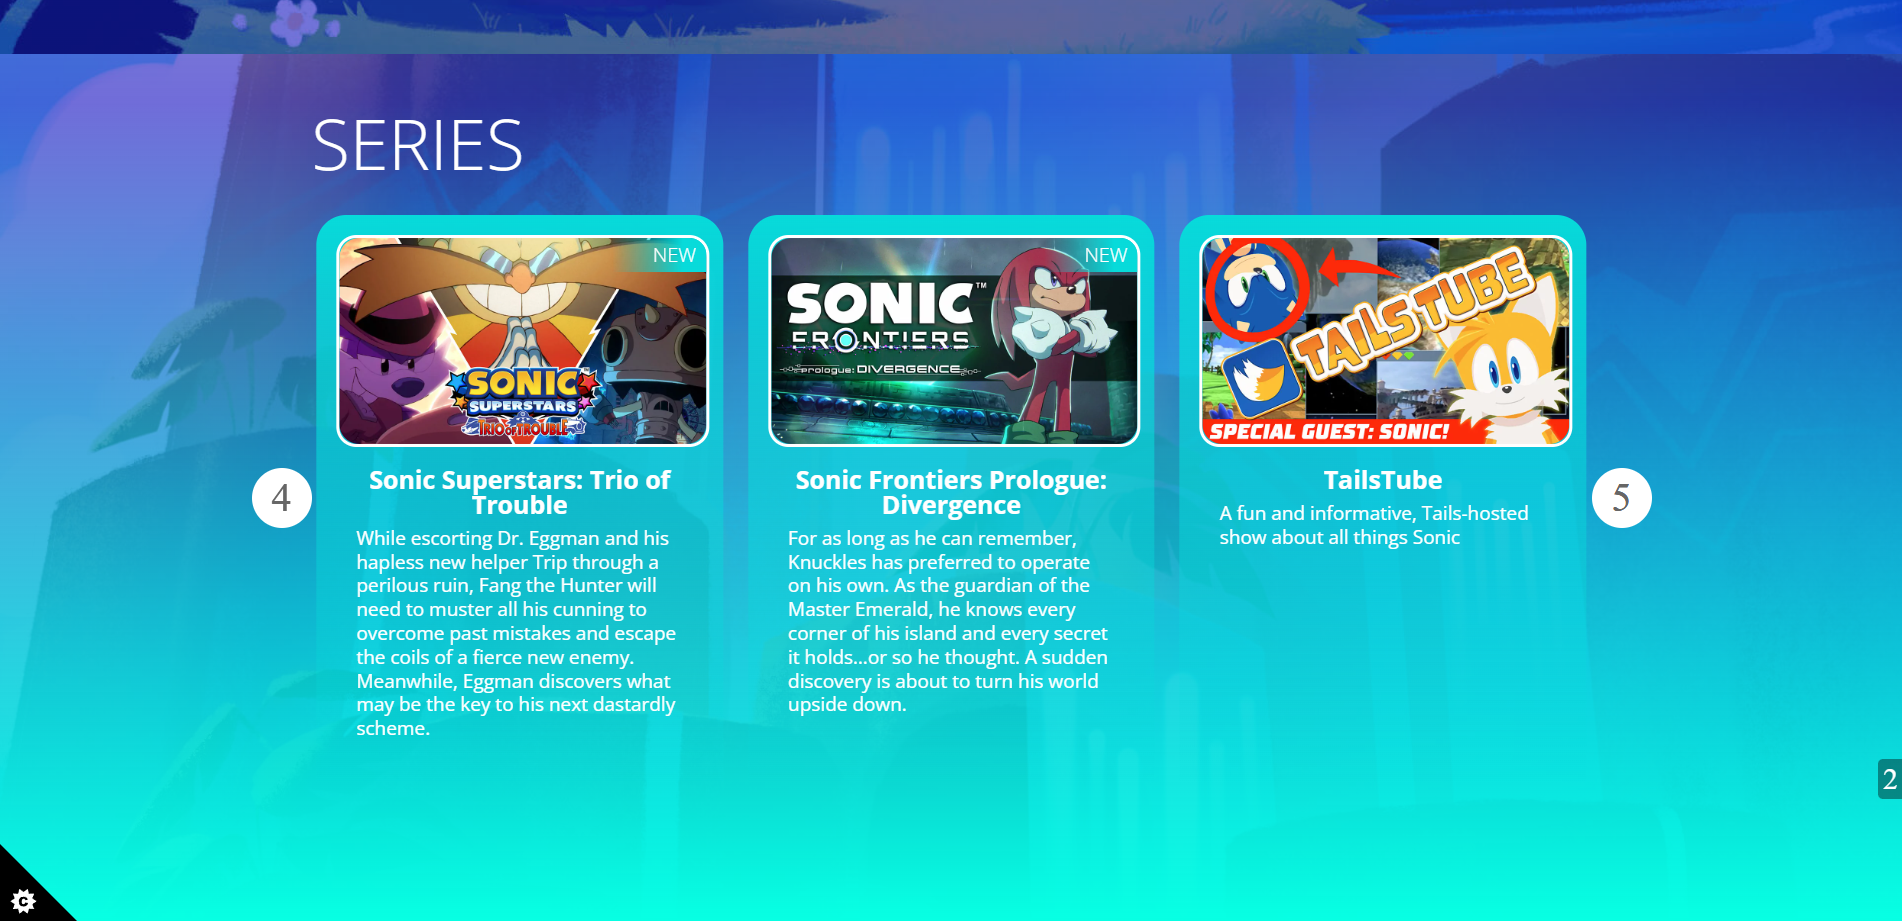 Sonic & Friends' is a New Animated Series, Here's the Official Reveal  Teaser - Page 2 - Media - Sonic Stadium